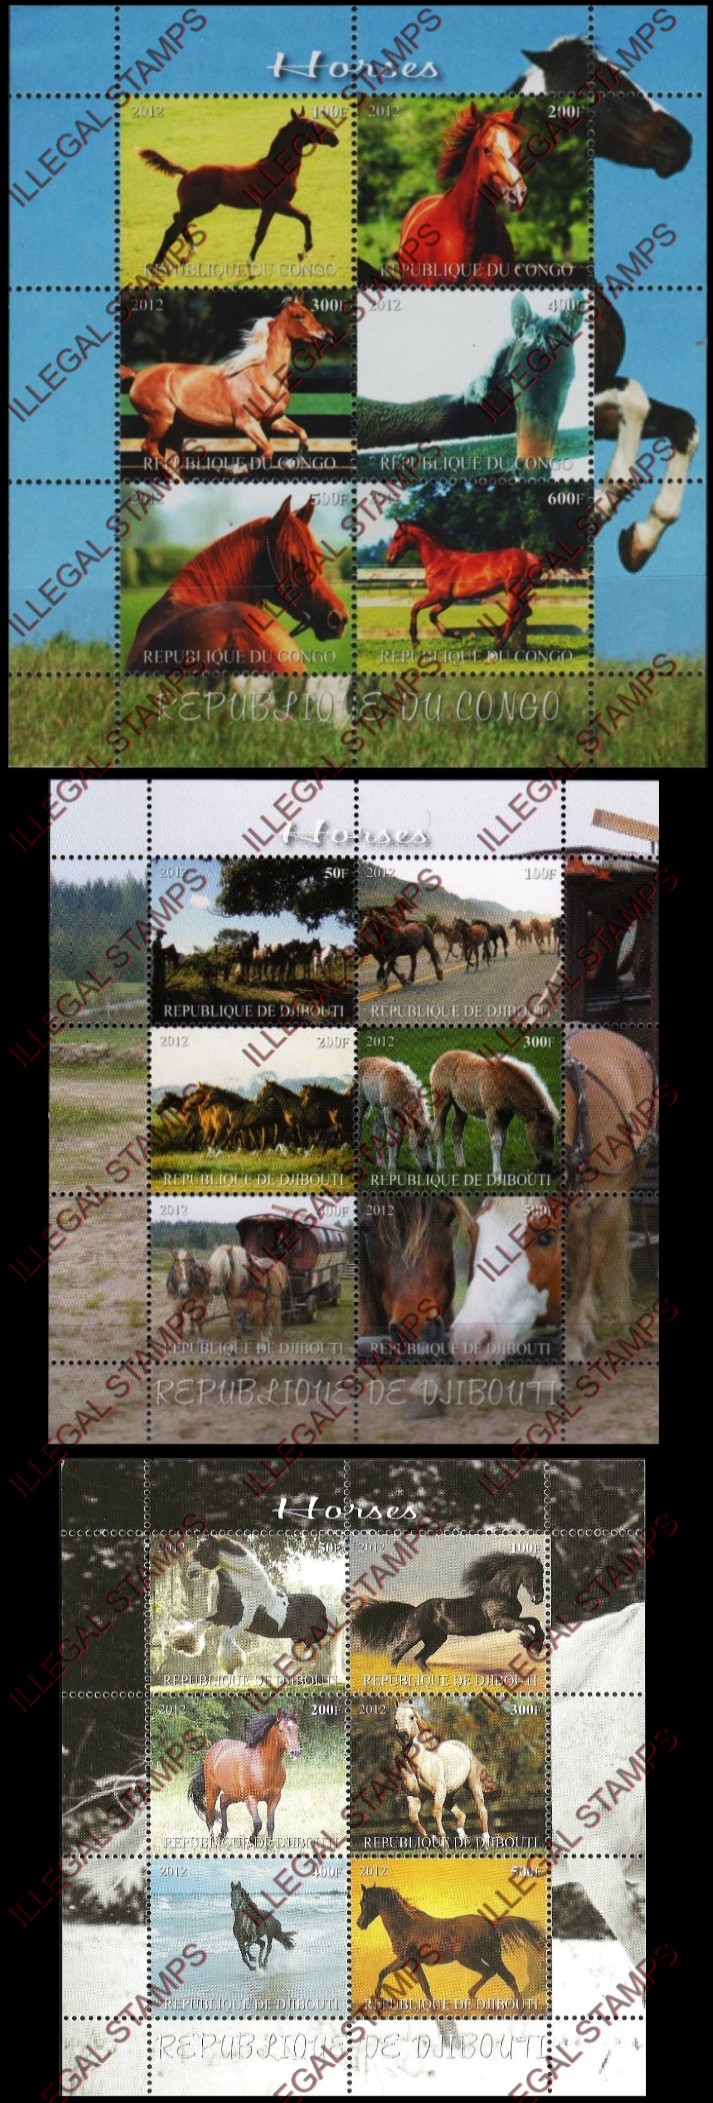 Djibouti 2012 Horses Illegal Stamp Sheetlets of 6